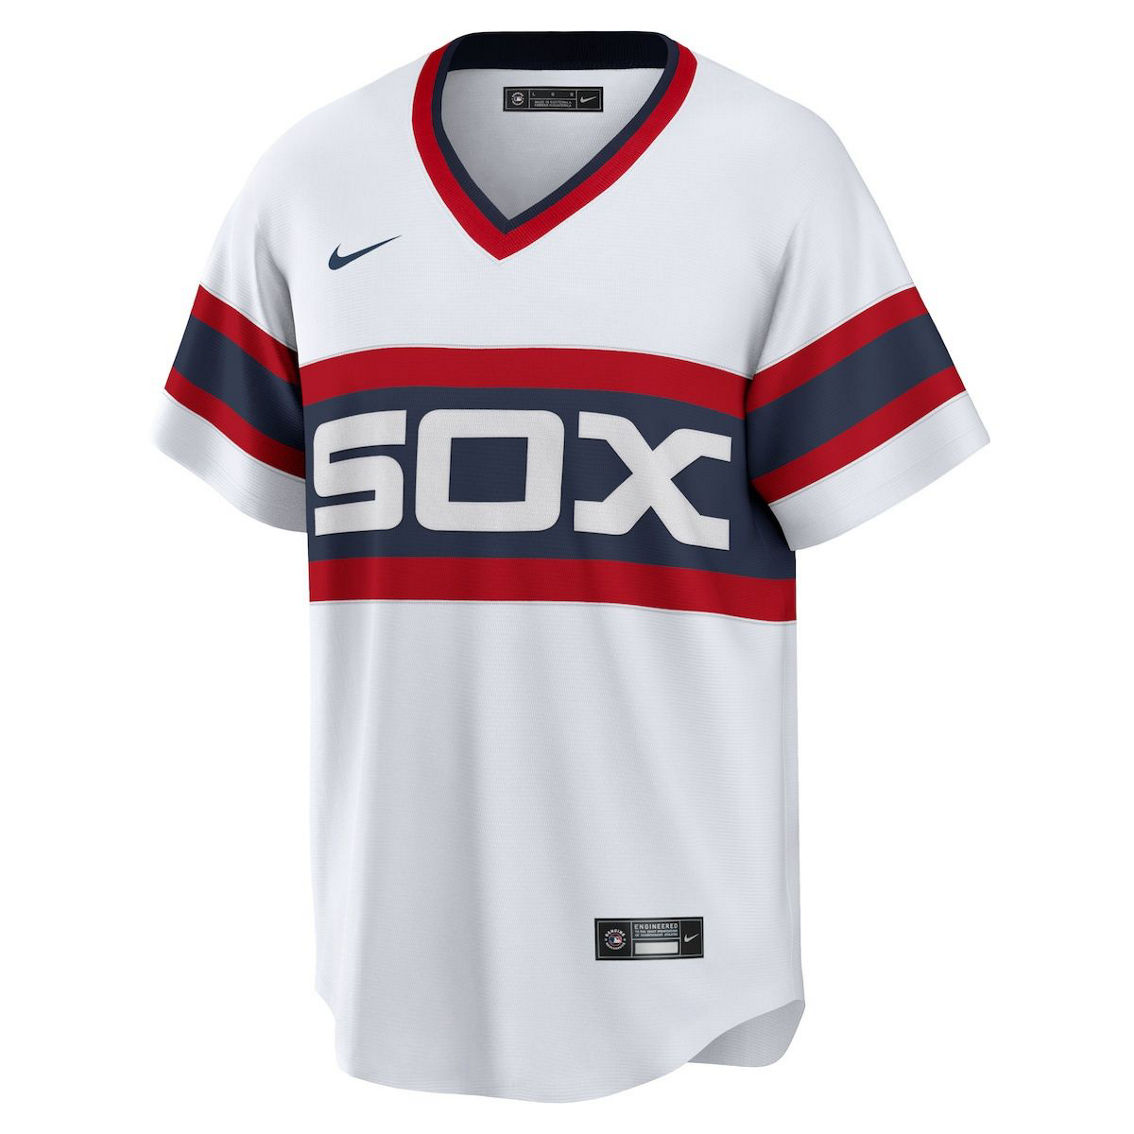 Nike Men's Frank Thomas White Chicago White Sox Home Cooperstown Collection Player Jersey - Image 3 of 4